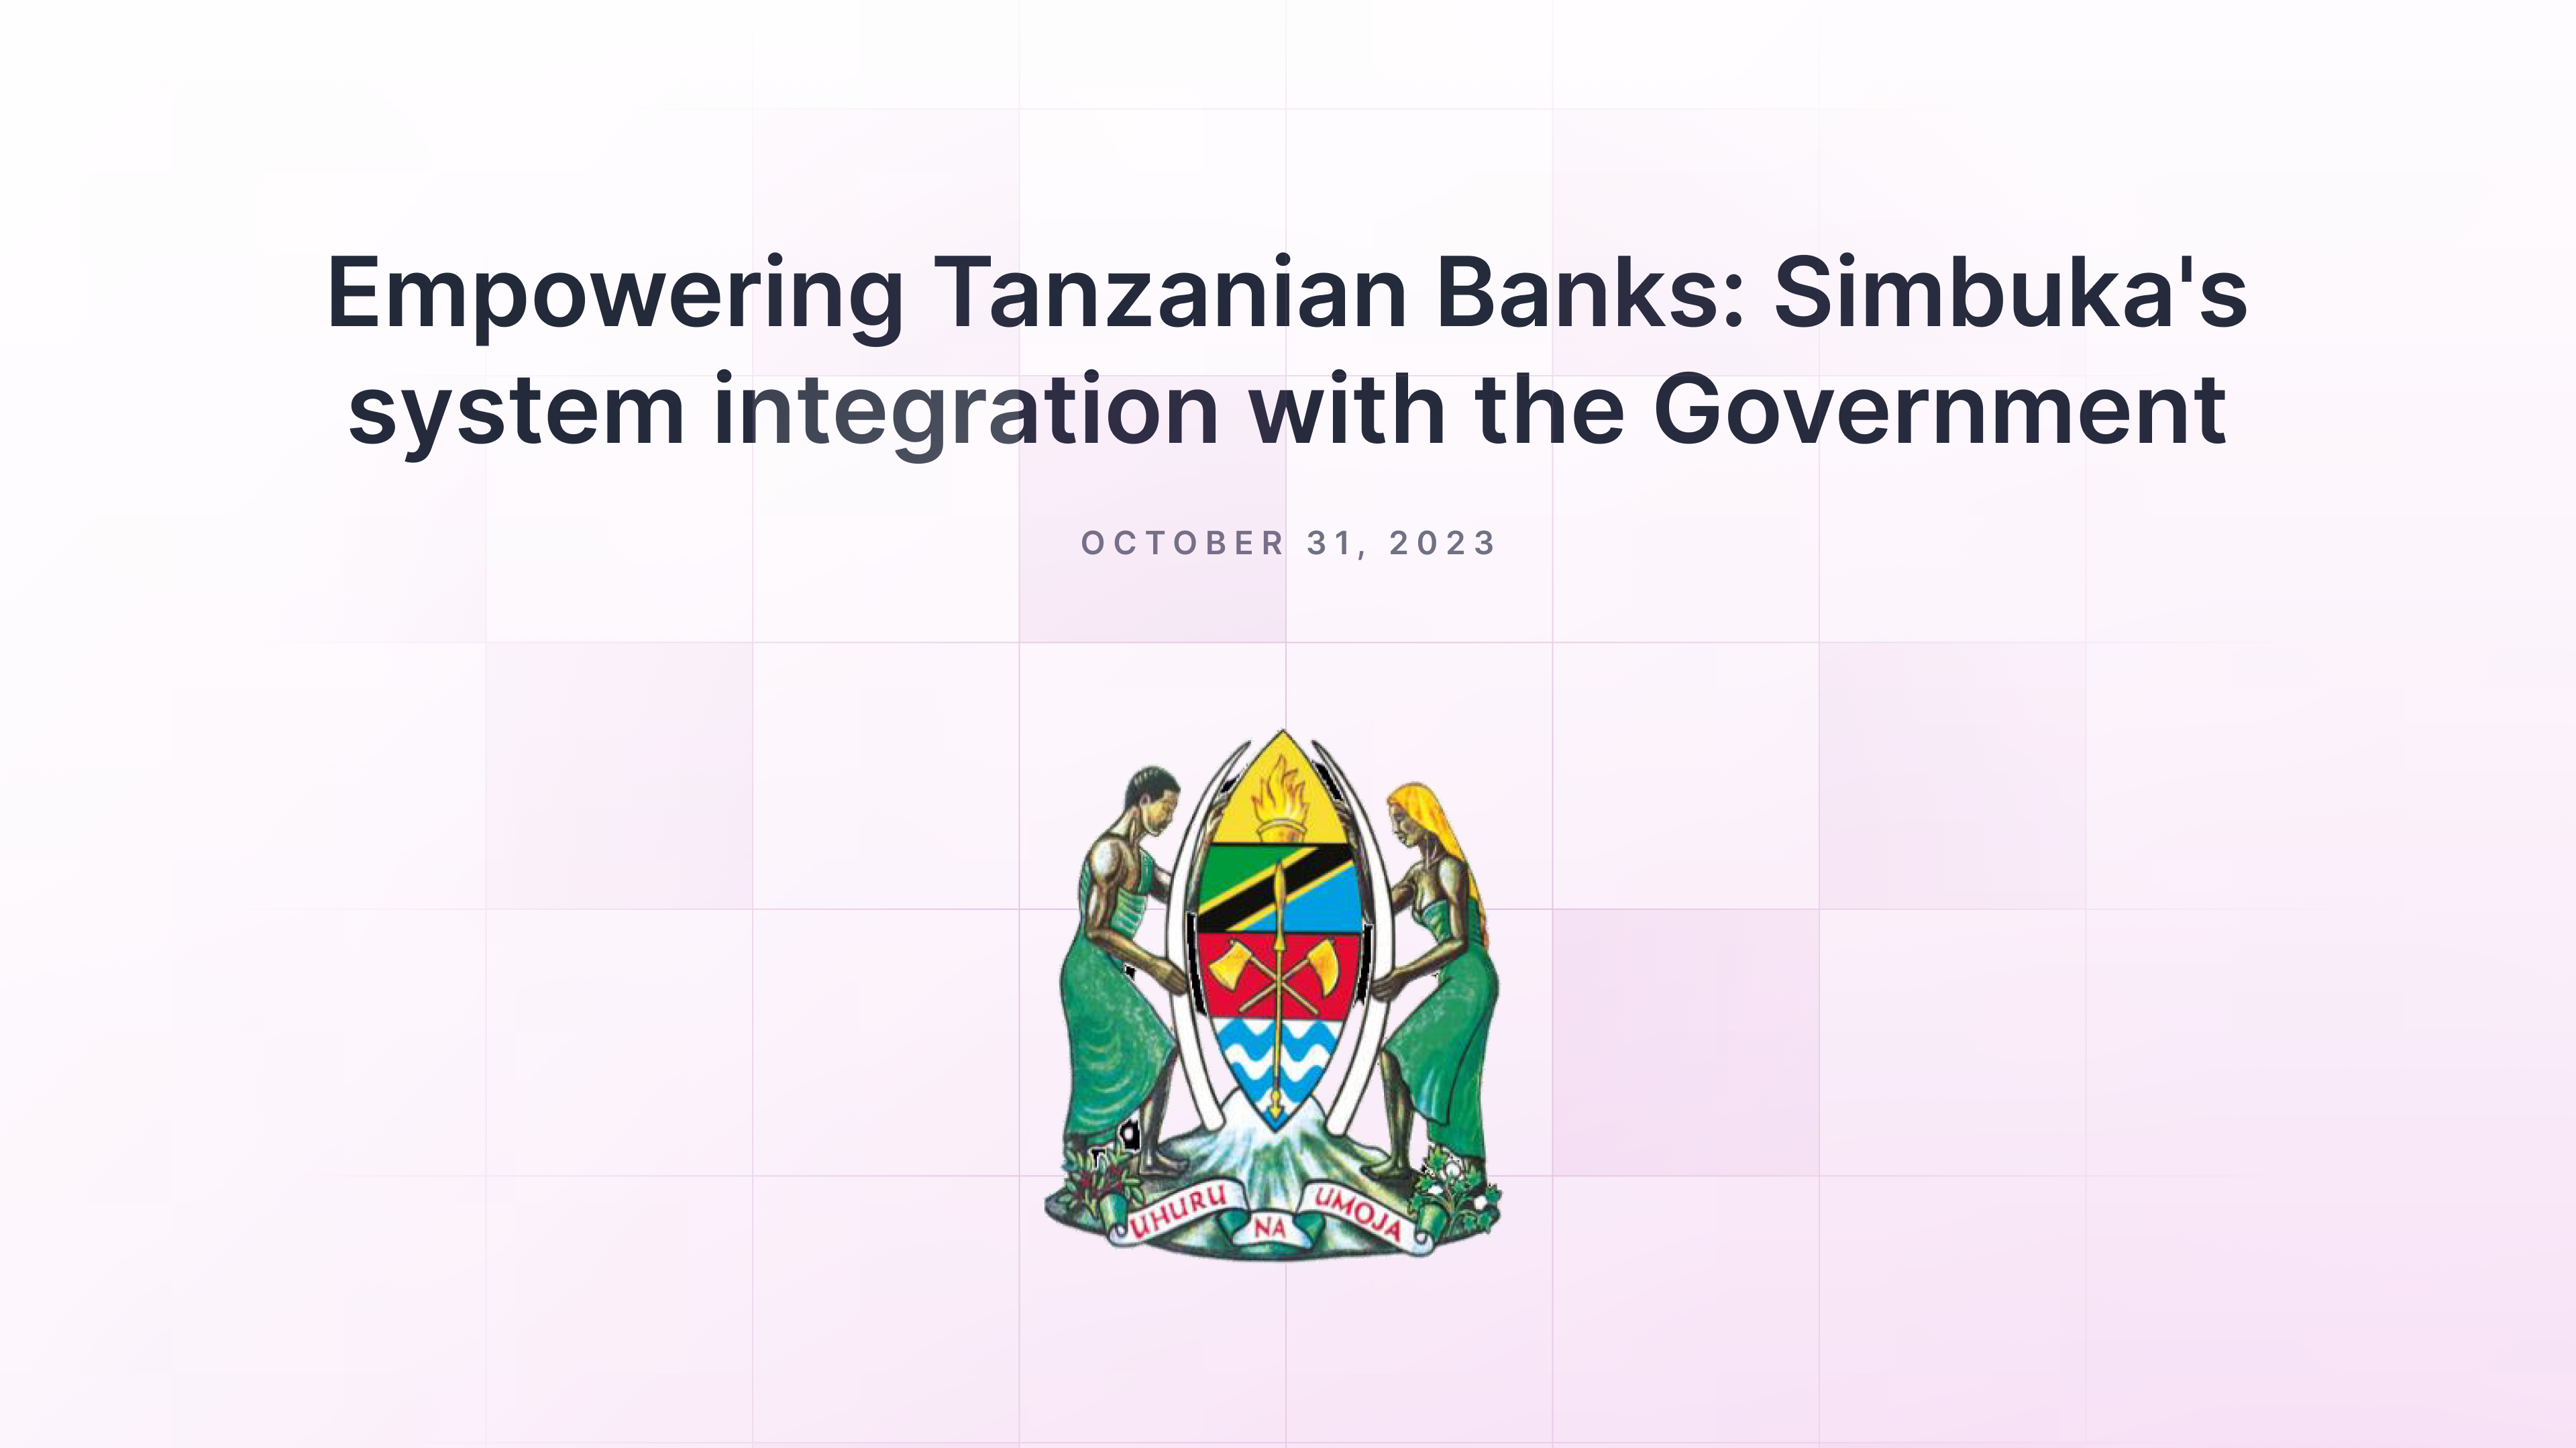 Empowering Tanzanian Banks: Simbuka's system integration with the Government